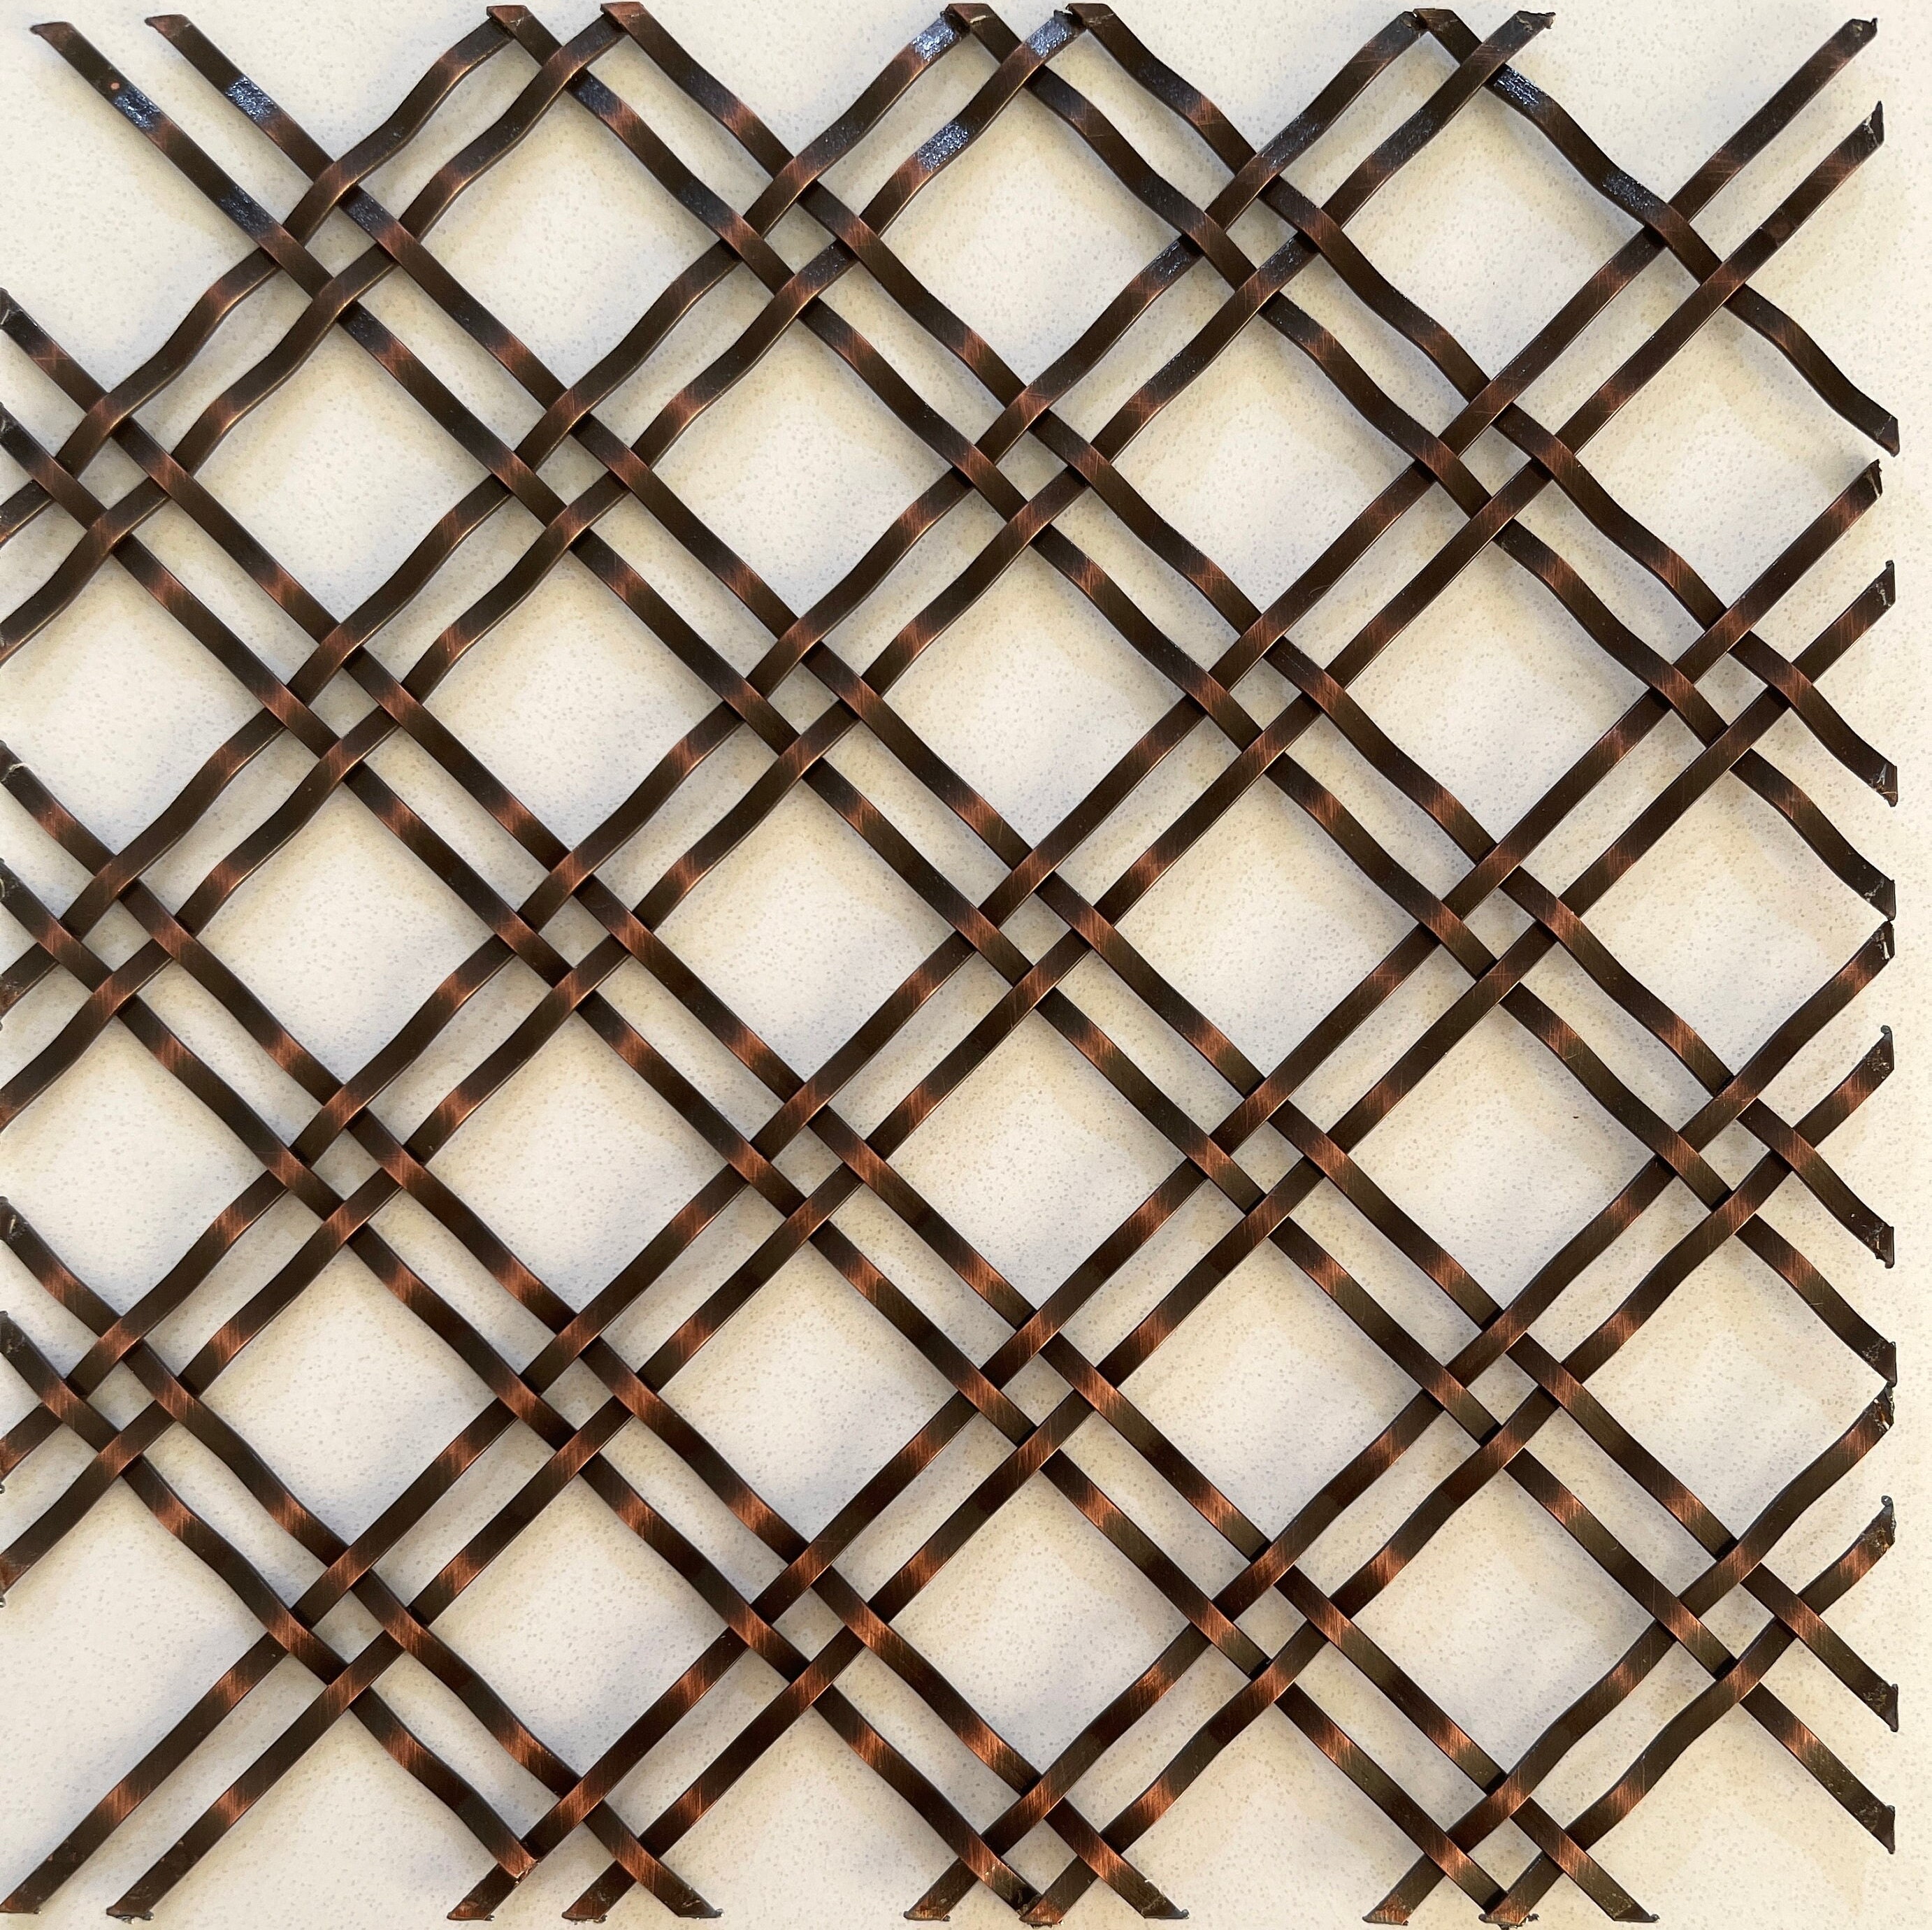 Wire Mesh Brush Oil Bronze h Architectural Woven Furniture and